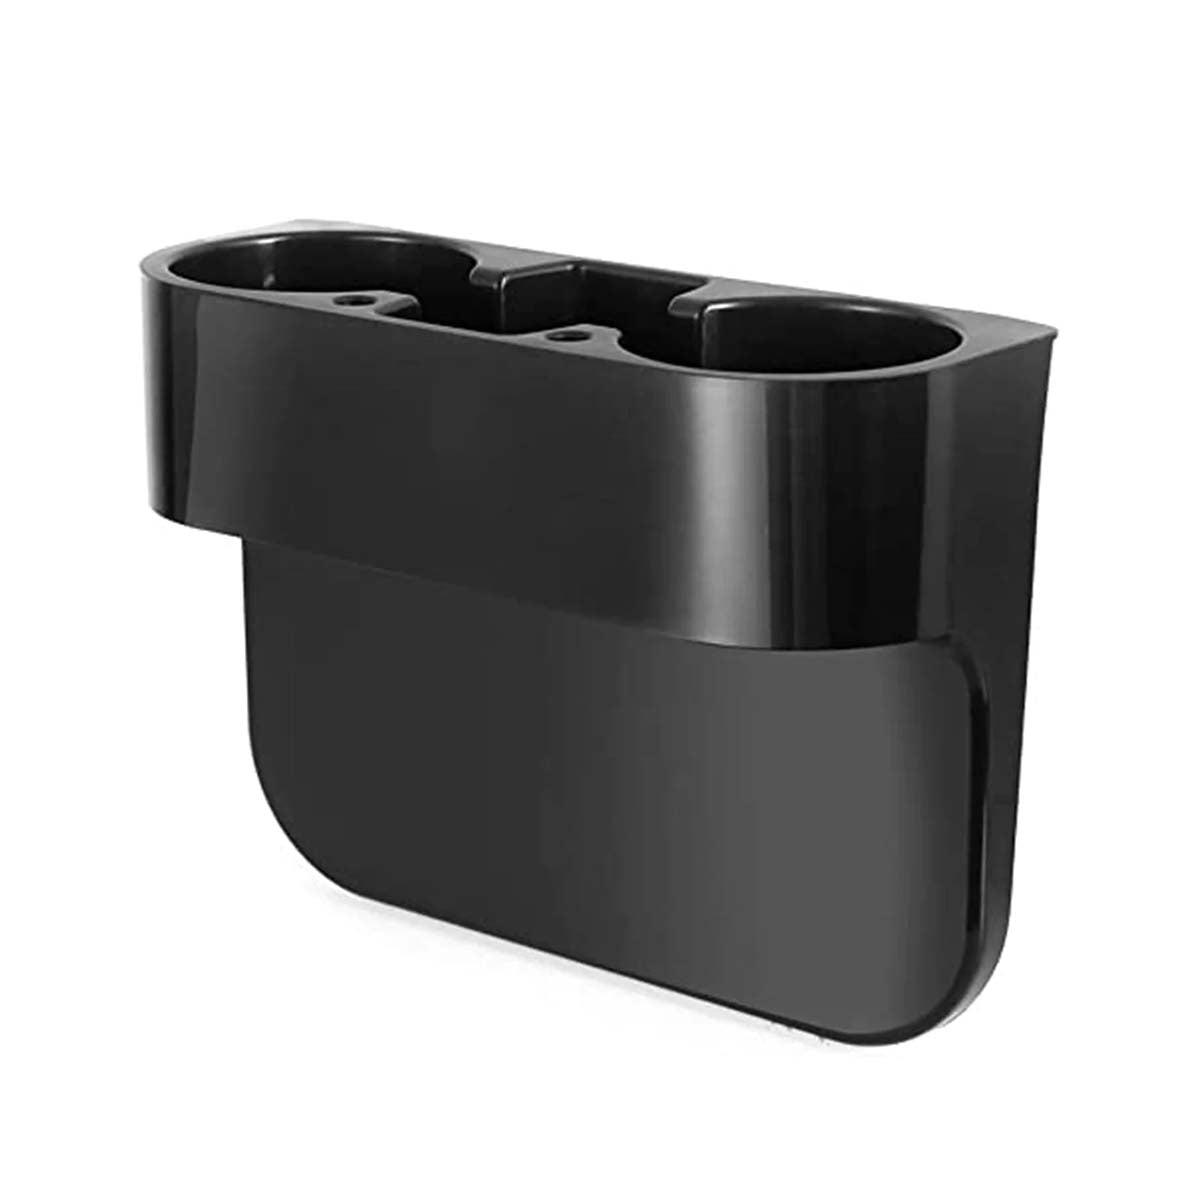 Cup Holder Portable Multifunction Vehicle Seat Cup Cell Phone Drinks Holder Box Car Interior Organizer, Custom Fit For Your Cars, Car Accessories CH11995